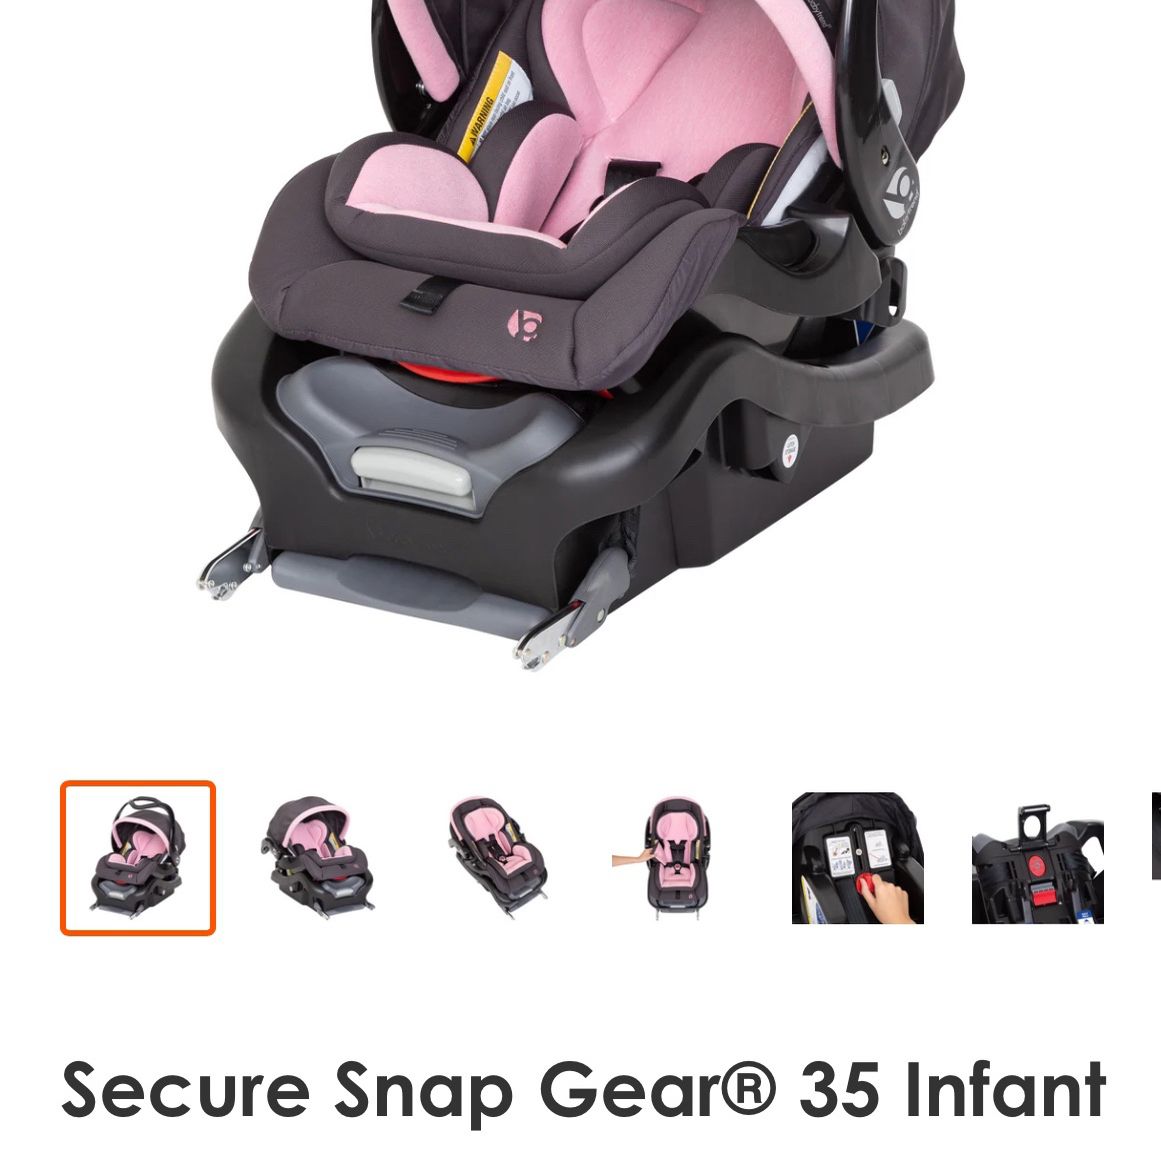 Baby Trend Secure Snap Gear® 35 Infant Car Seat - Wild Rose (Target Exclusive)